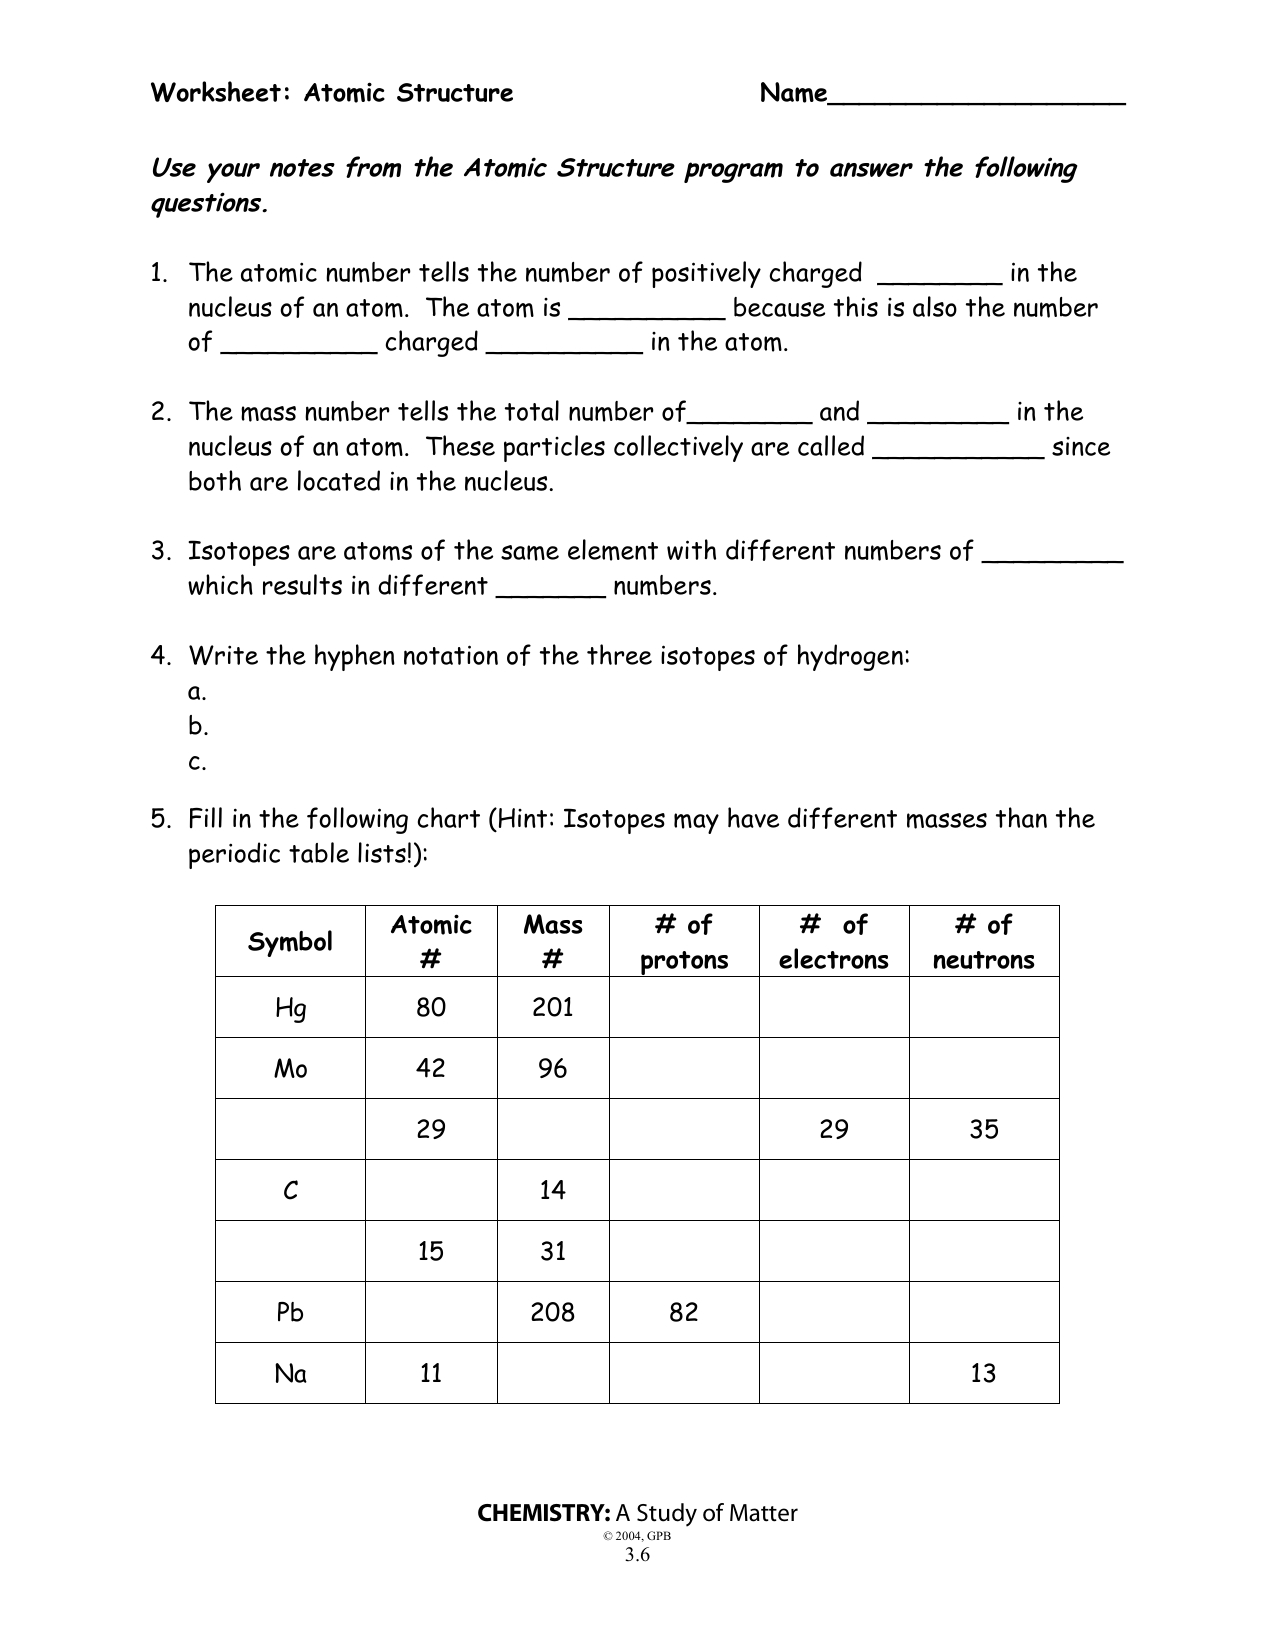 Atomic Structure Worksheet Along With Chemistry A Study Of Matter Worksheet